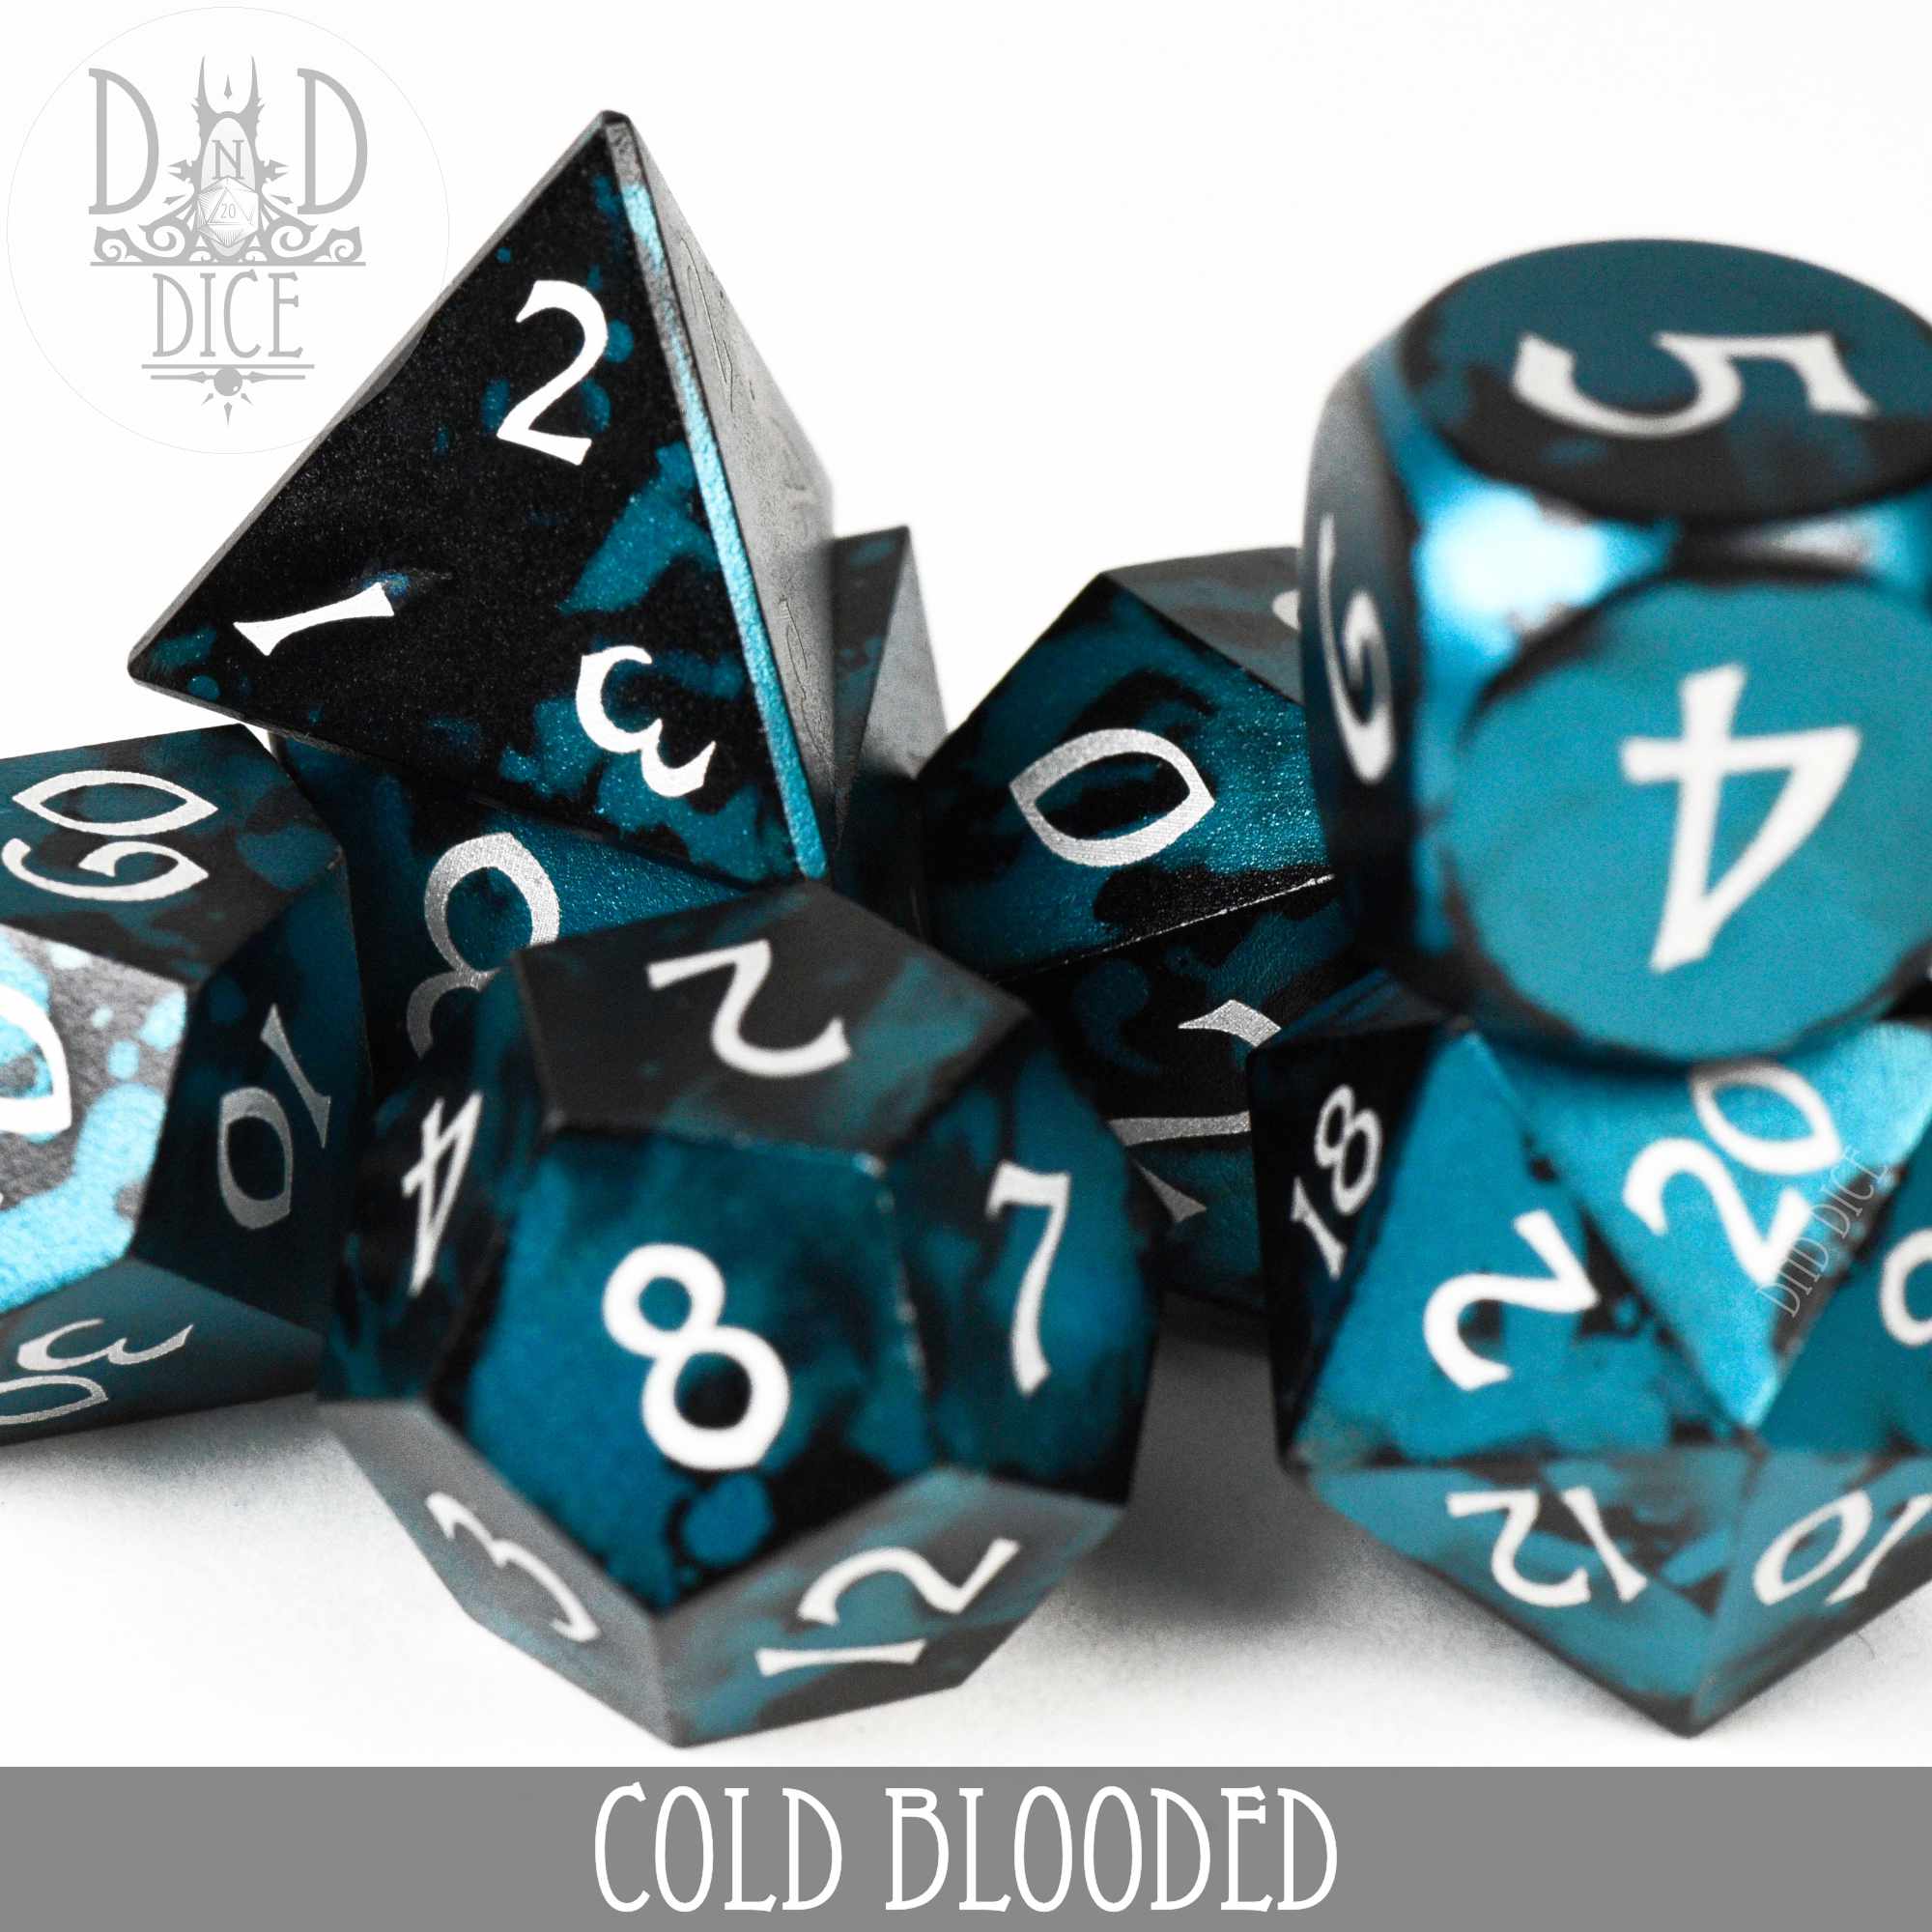 Cold Blooded Metal Dice Set (Gift Box)